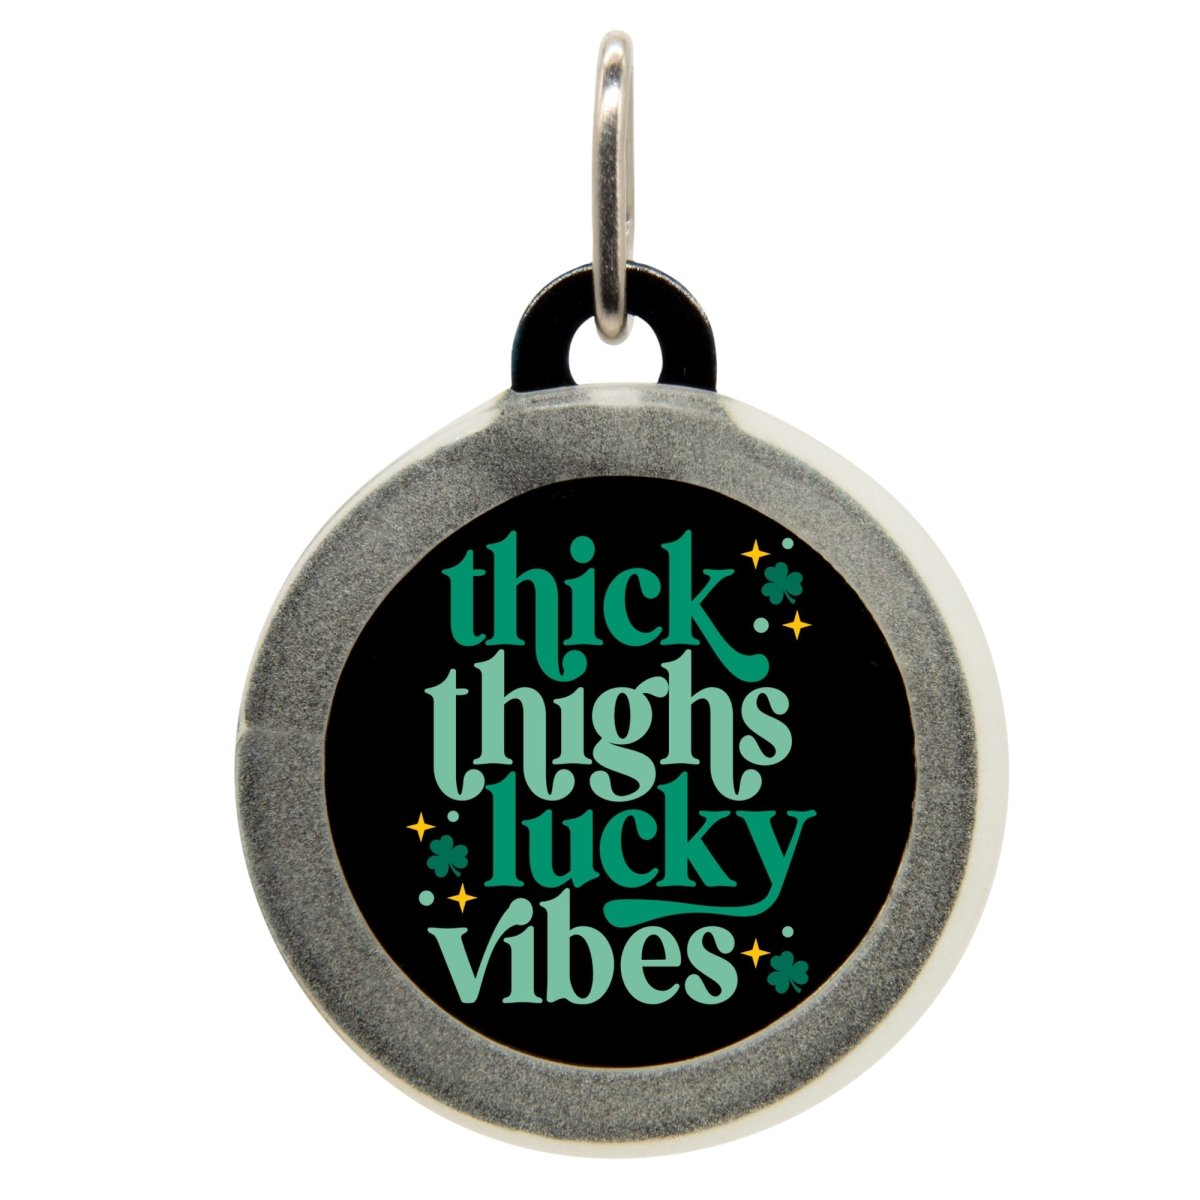 Thick Thighs Lucky Vibes Pet ID Tag - Oh My Paw'd